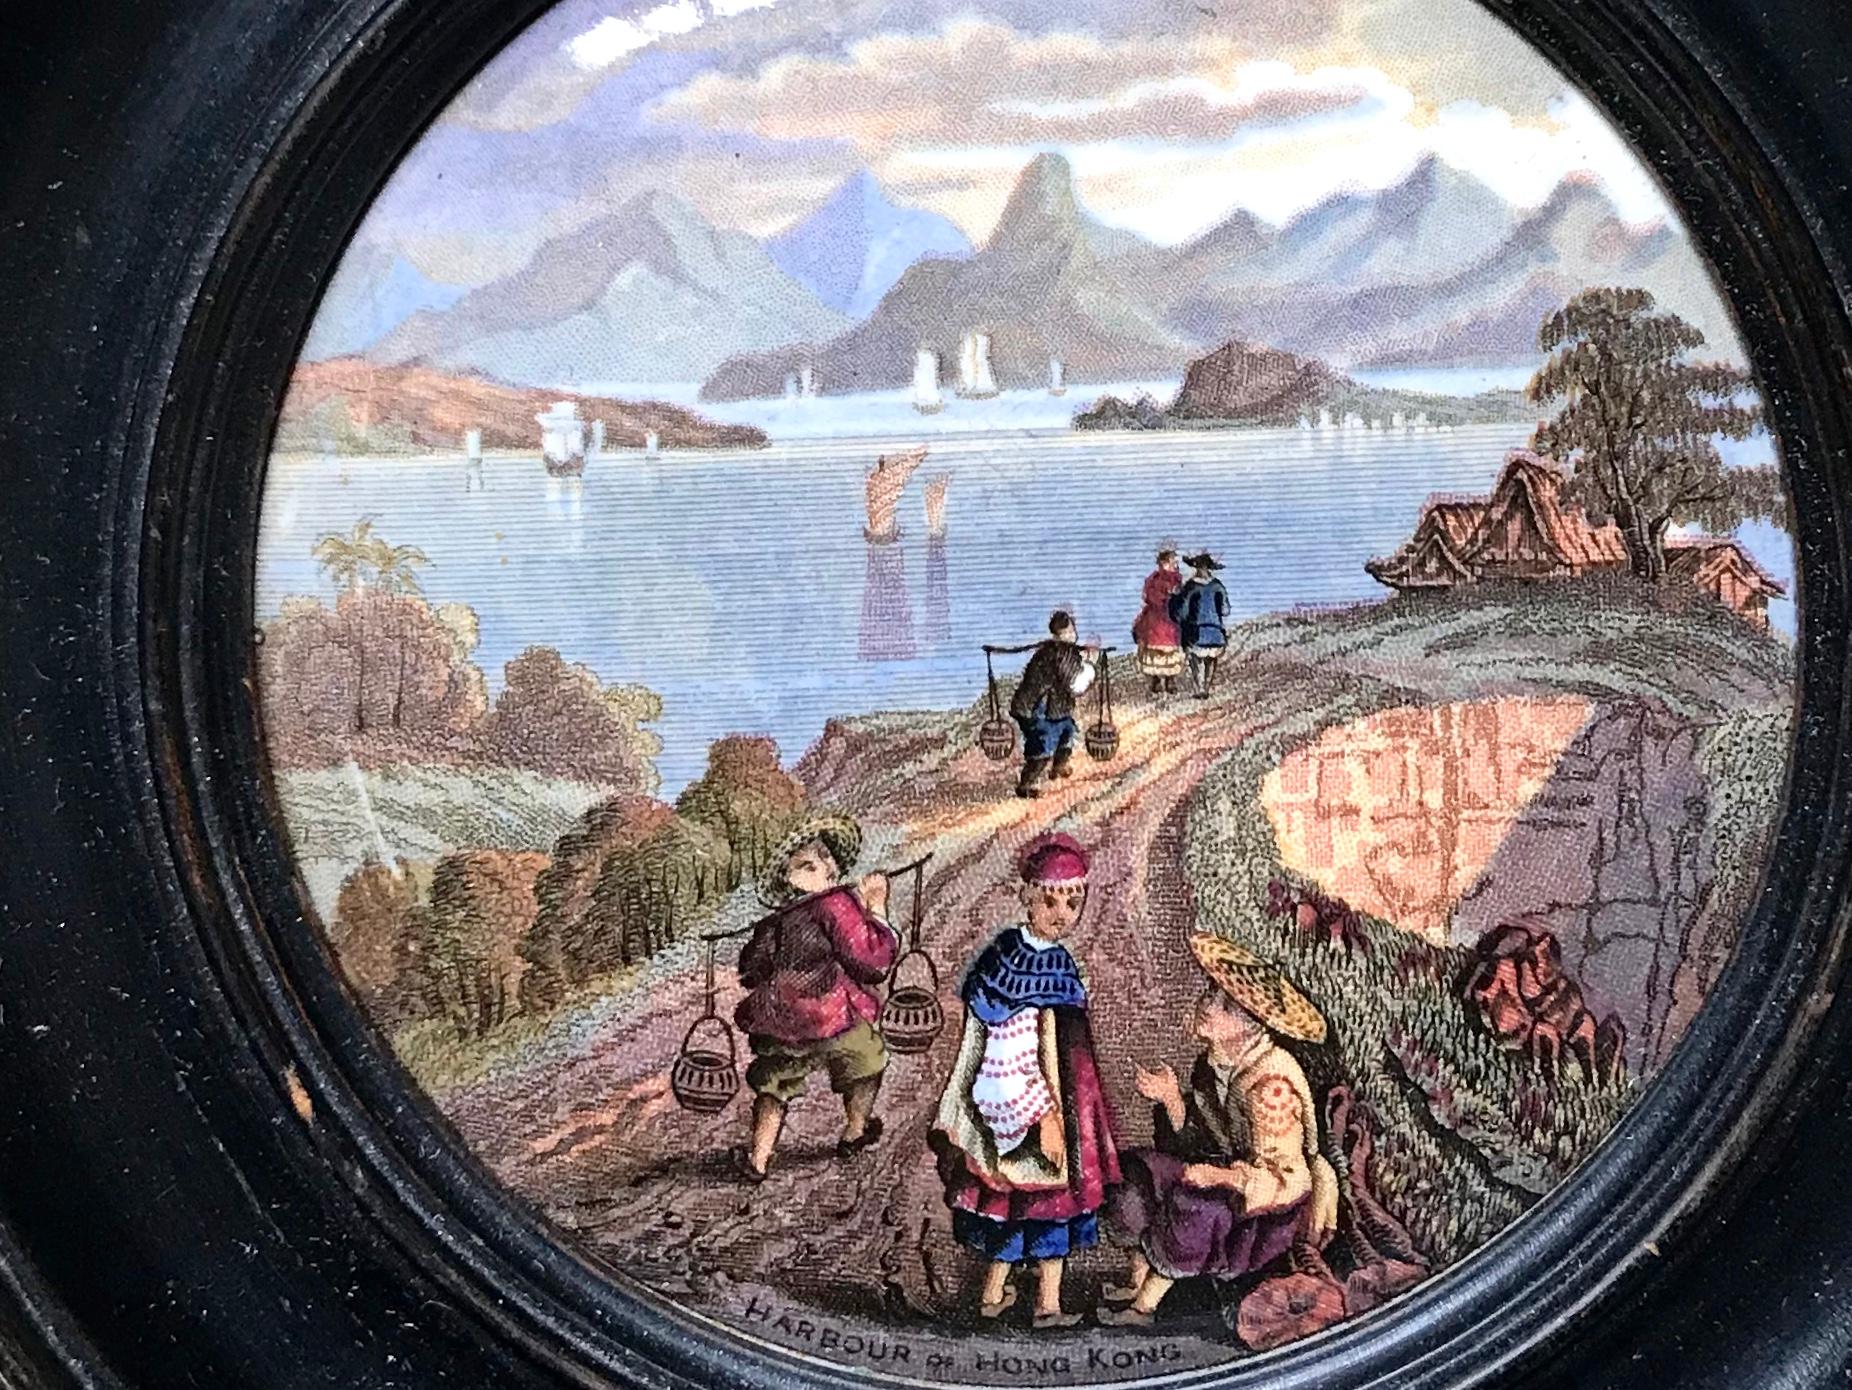 Harborview of Hong Kong Prattware decorative lid. Prattware decorative lid from turn of the century in original ebonized frame with harbor view of Hong Kong in perfect condition, England, 19th century.
Dimensions including frame: 6.13 diameter x